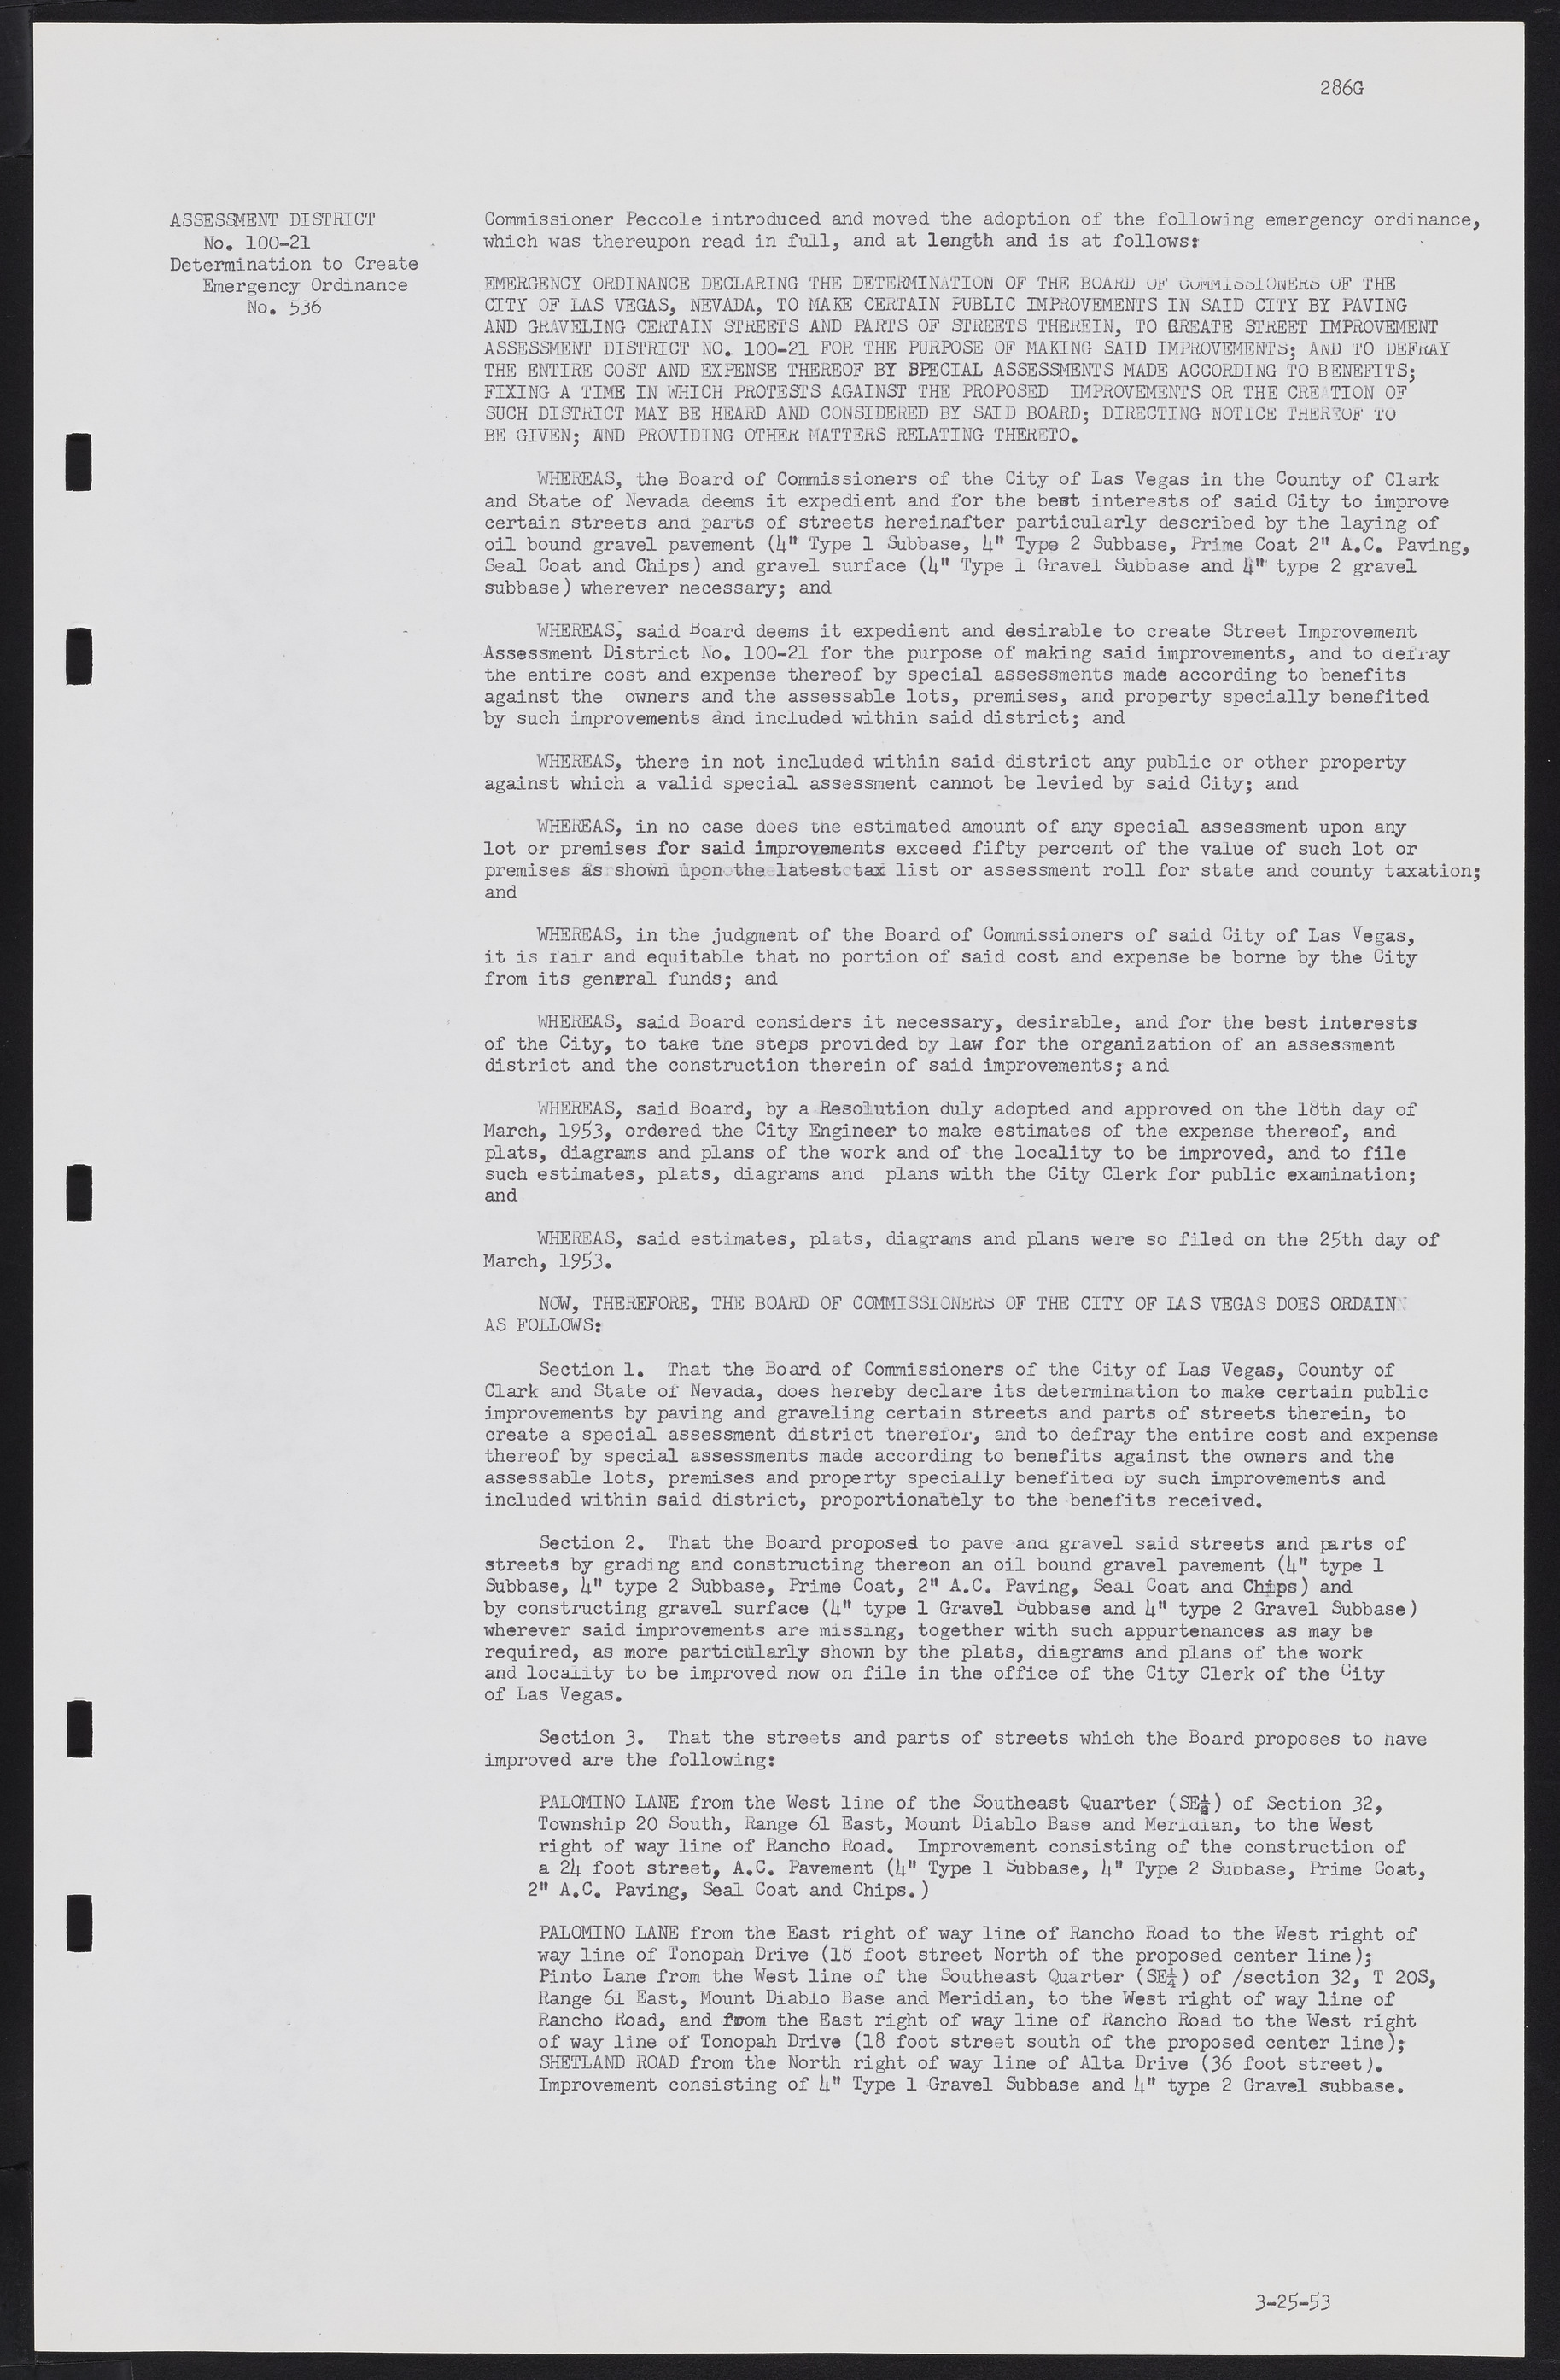 Las Vegas City Commission Minutes, May 26, 1952 to February 17, 1954, lvc000008-309